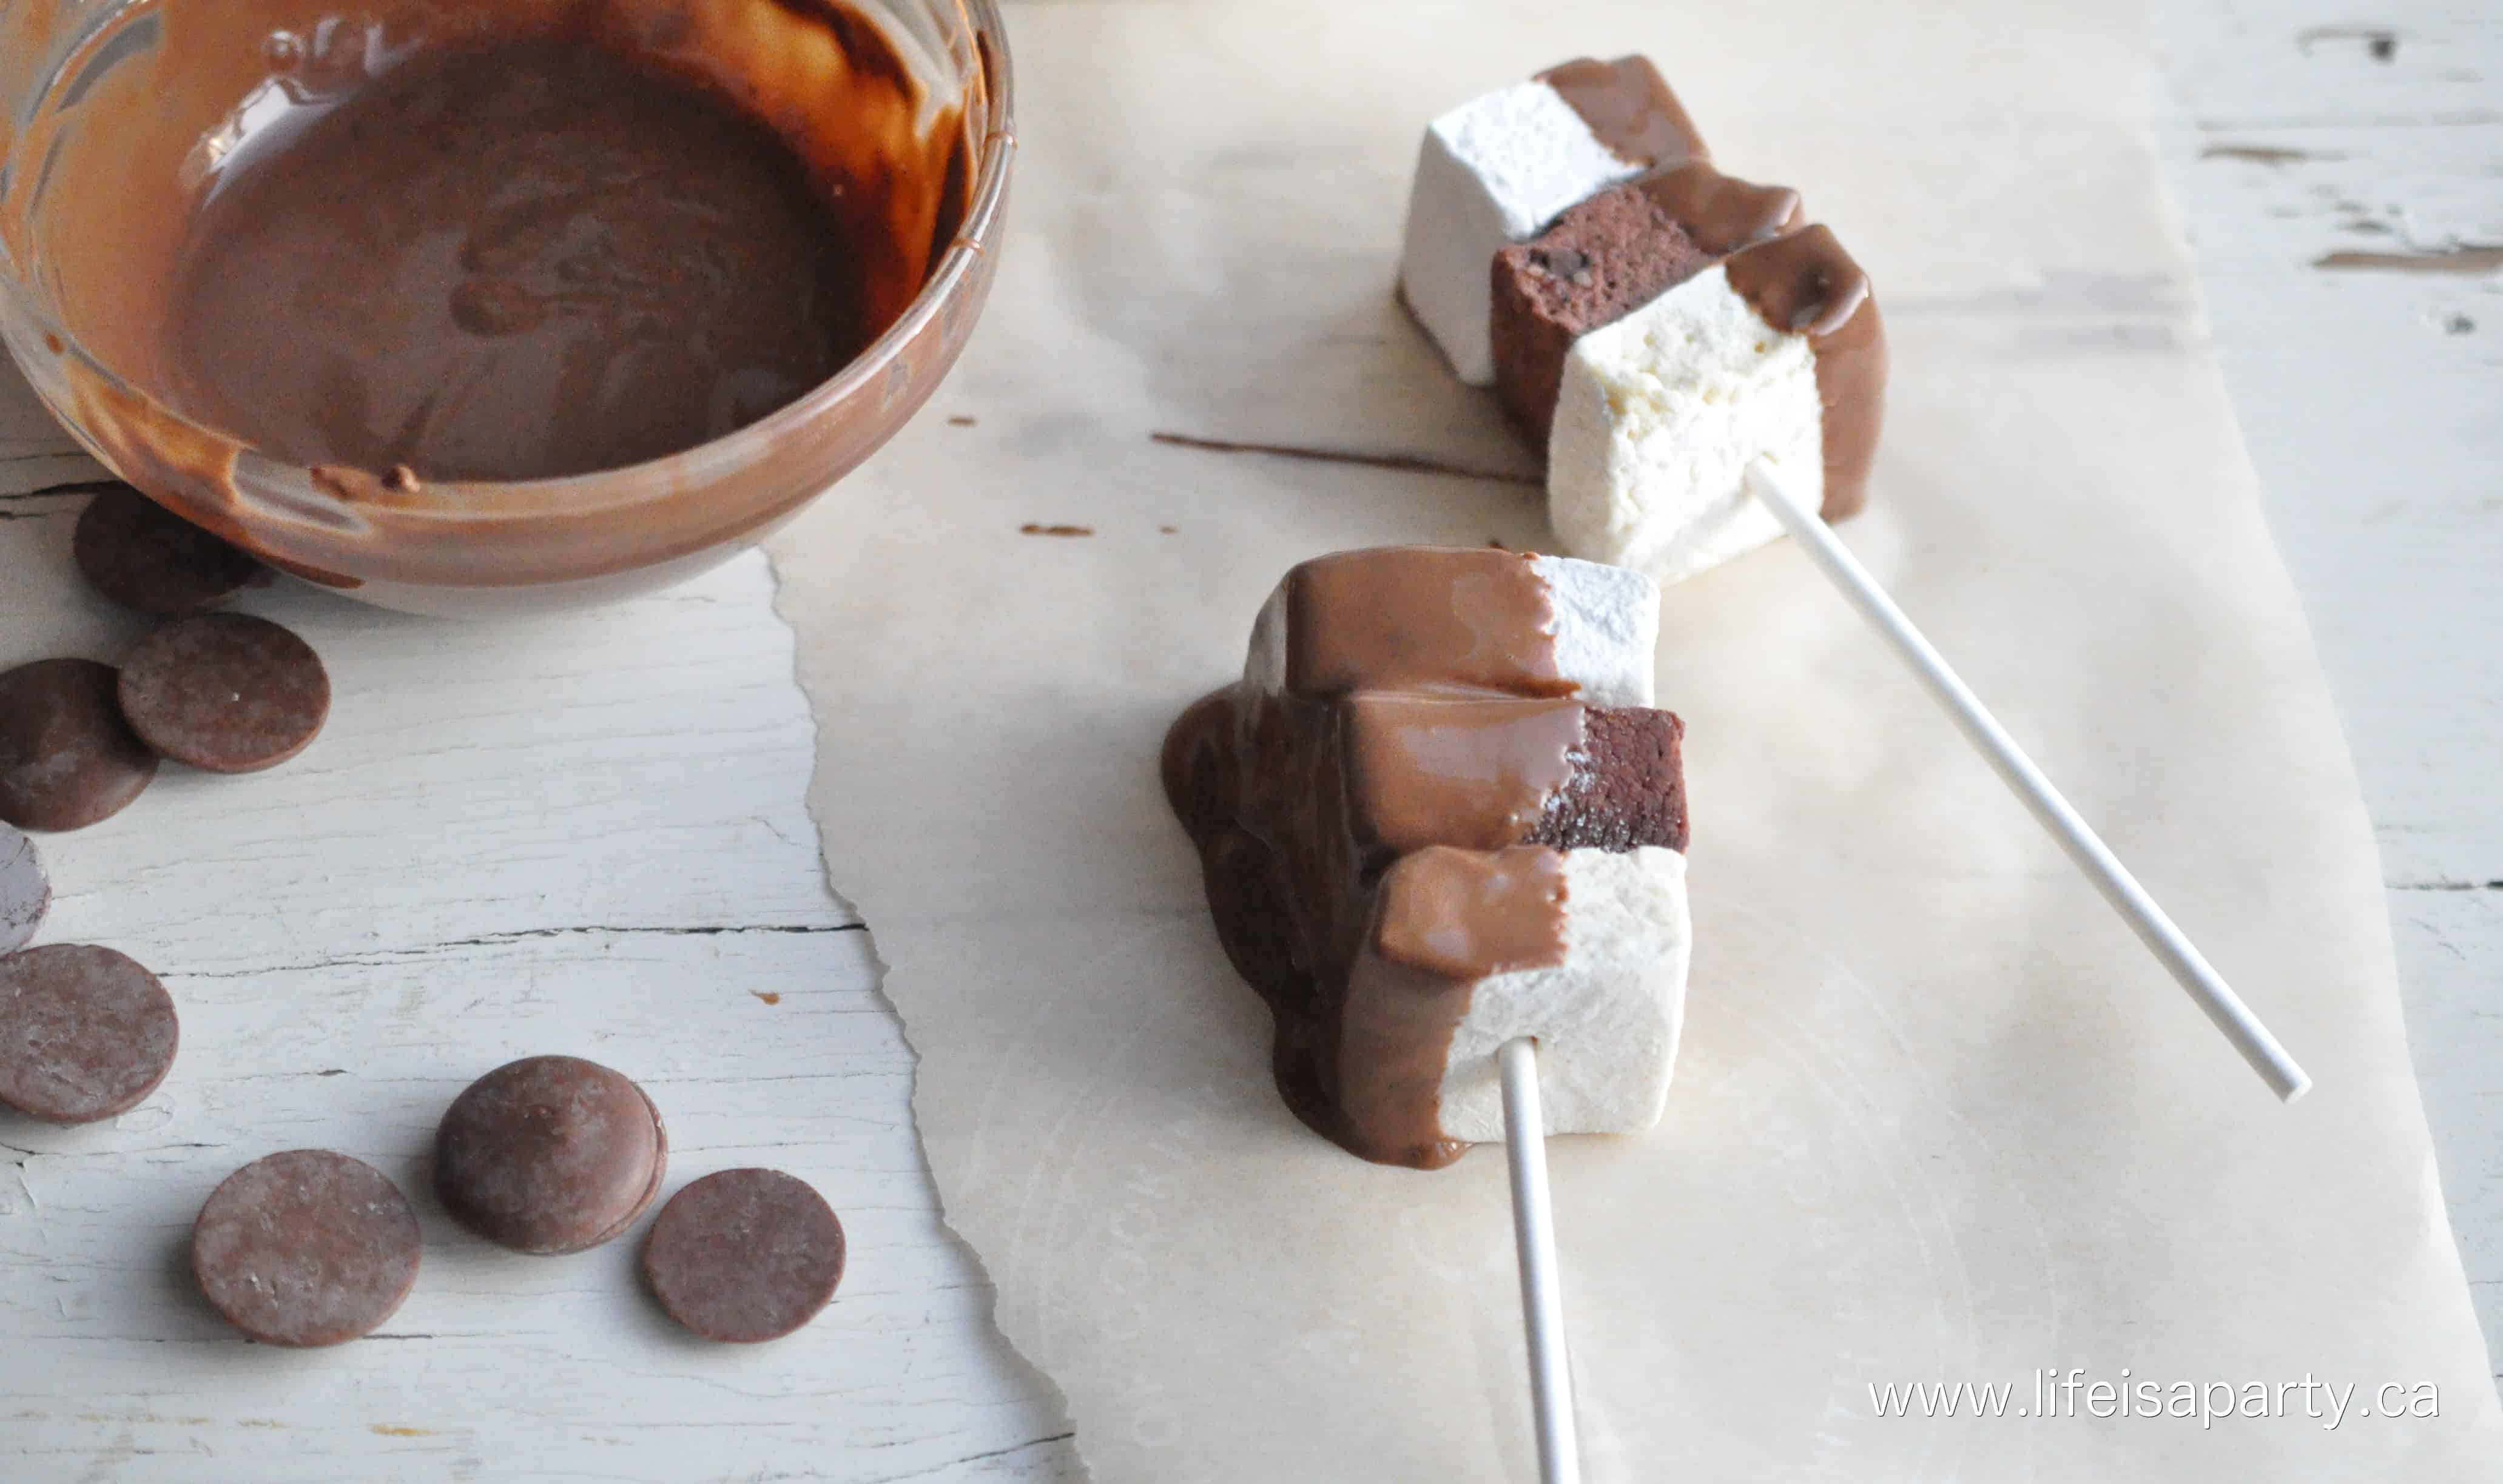 Homemade Flavoured Marshmallows lollipops with chocolate